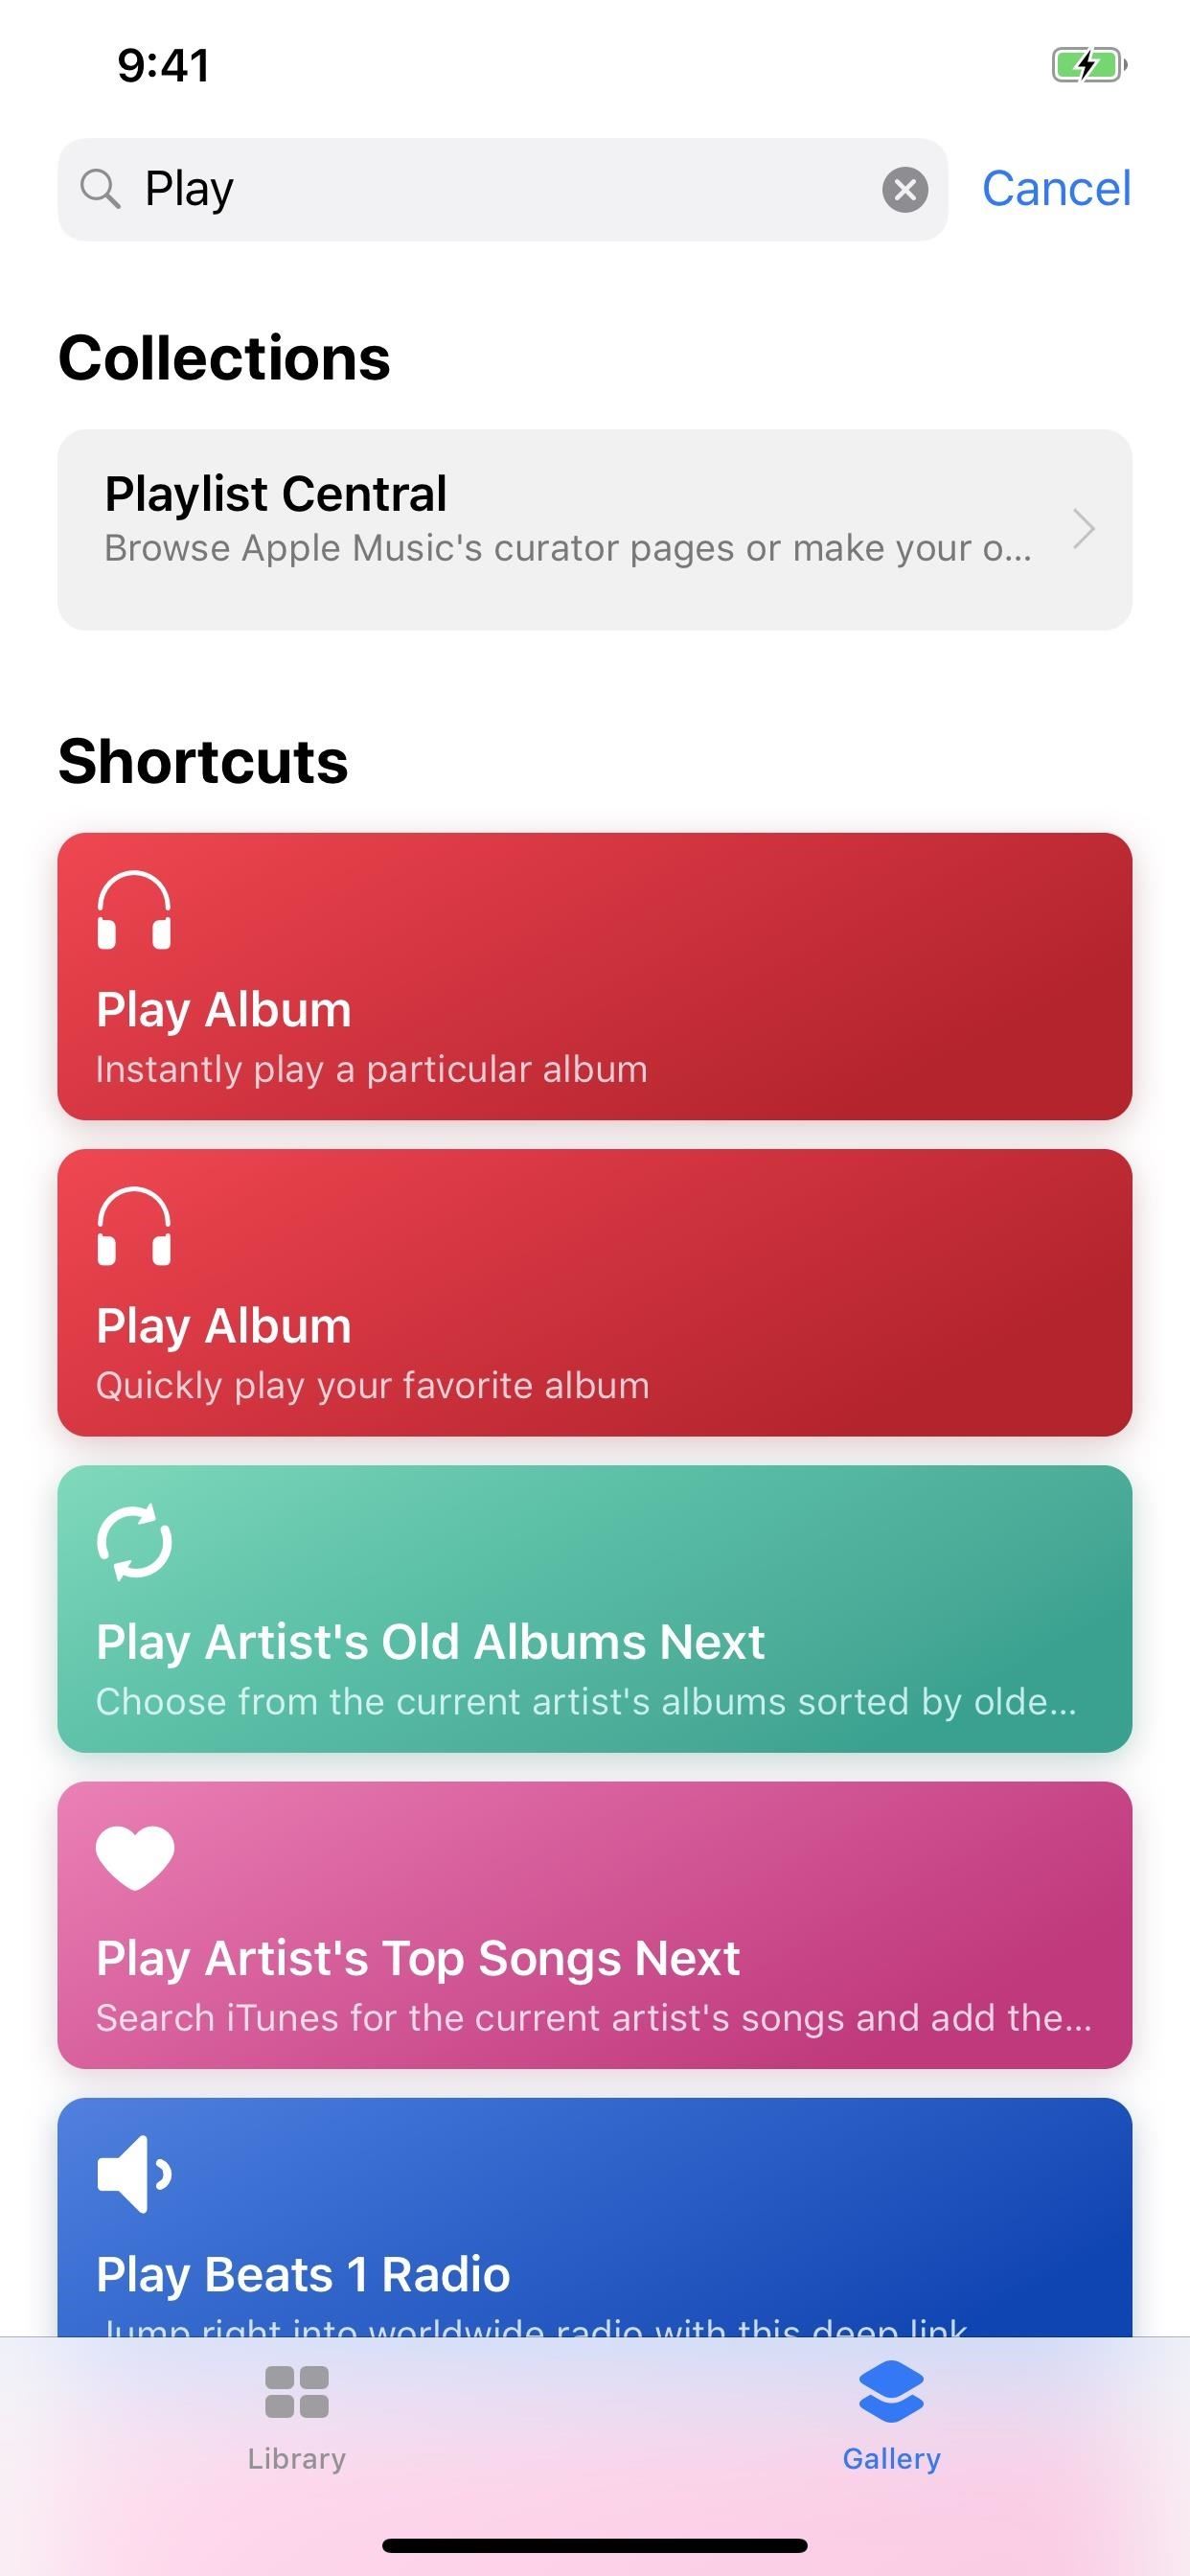 PSA: There's a Stupid Reason You're Not Finding Good Shortcuts in Apple's Gallery